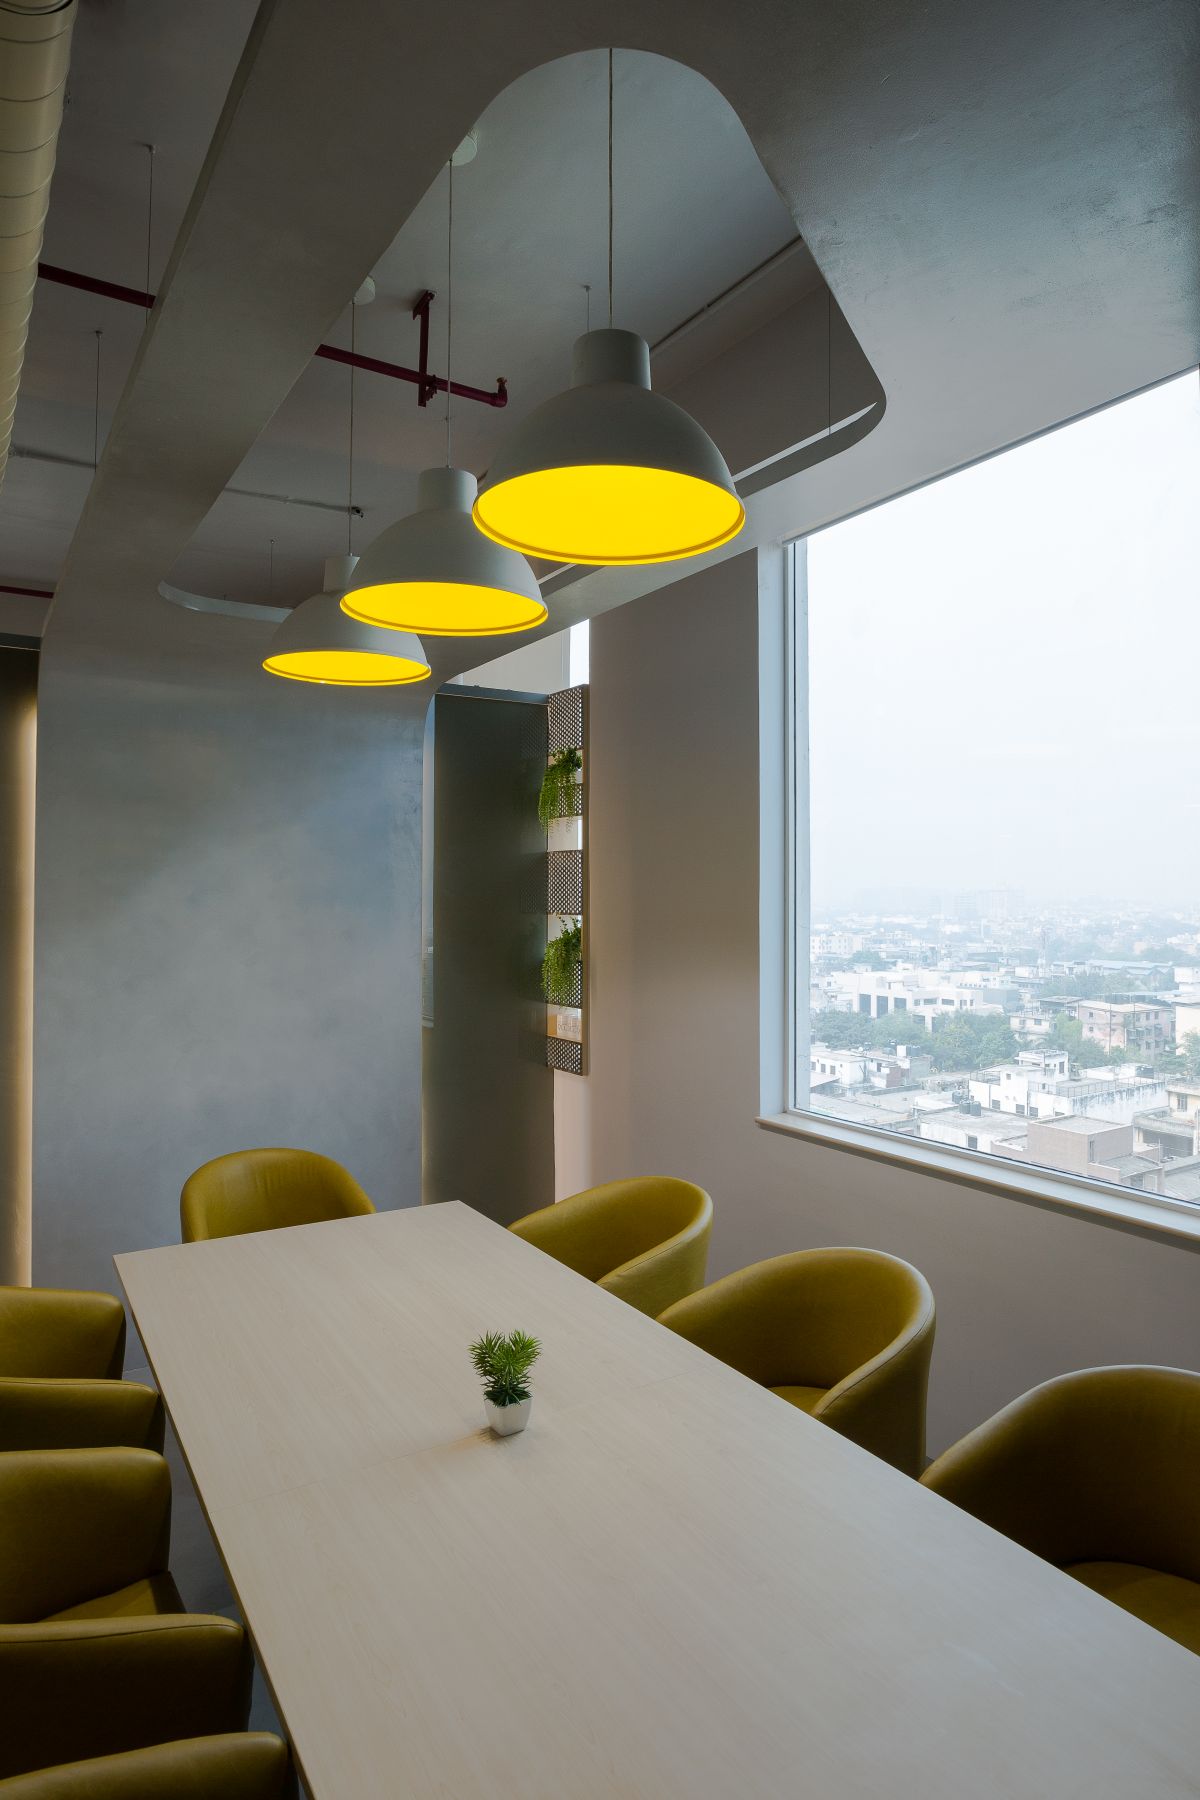 The Spatial Stimuli - An Architect's Office, at New Delhi, by Creative Designer Architects 23